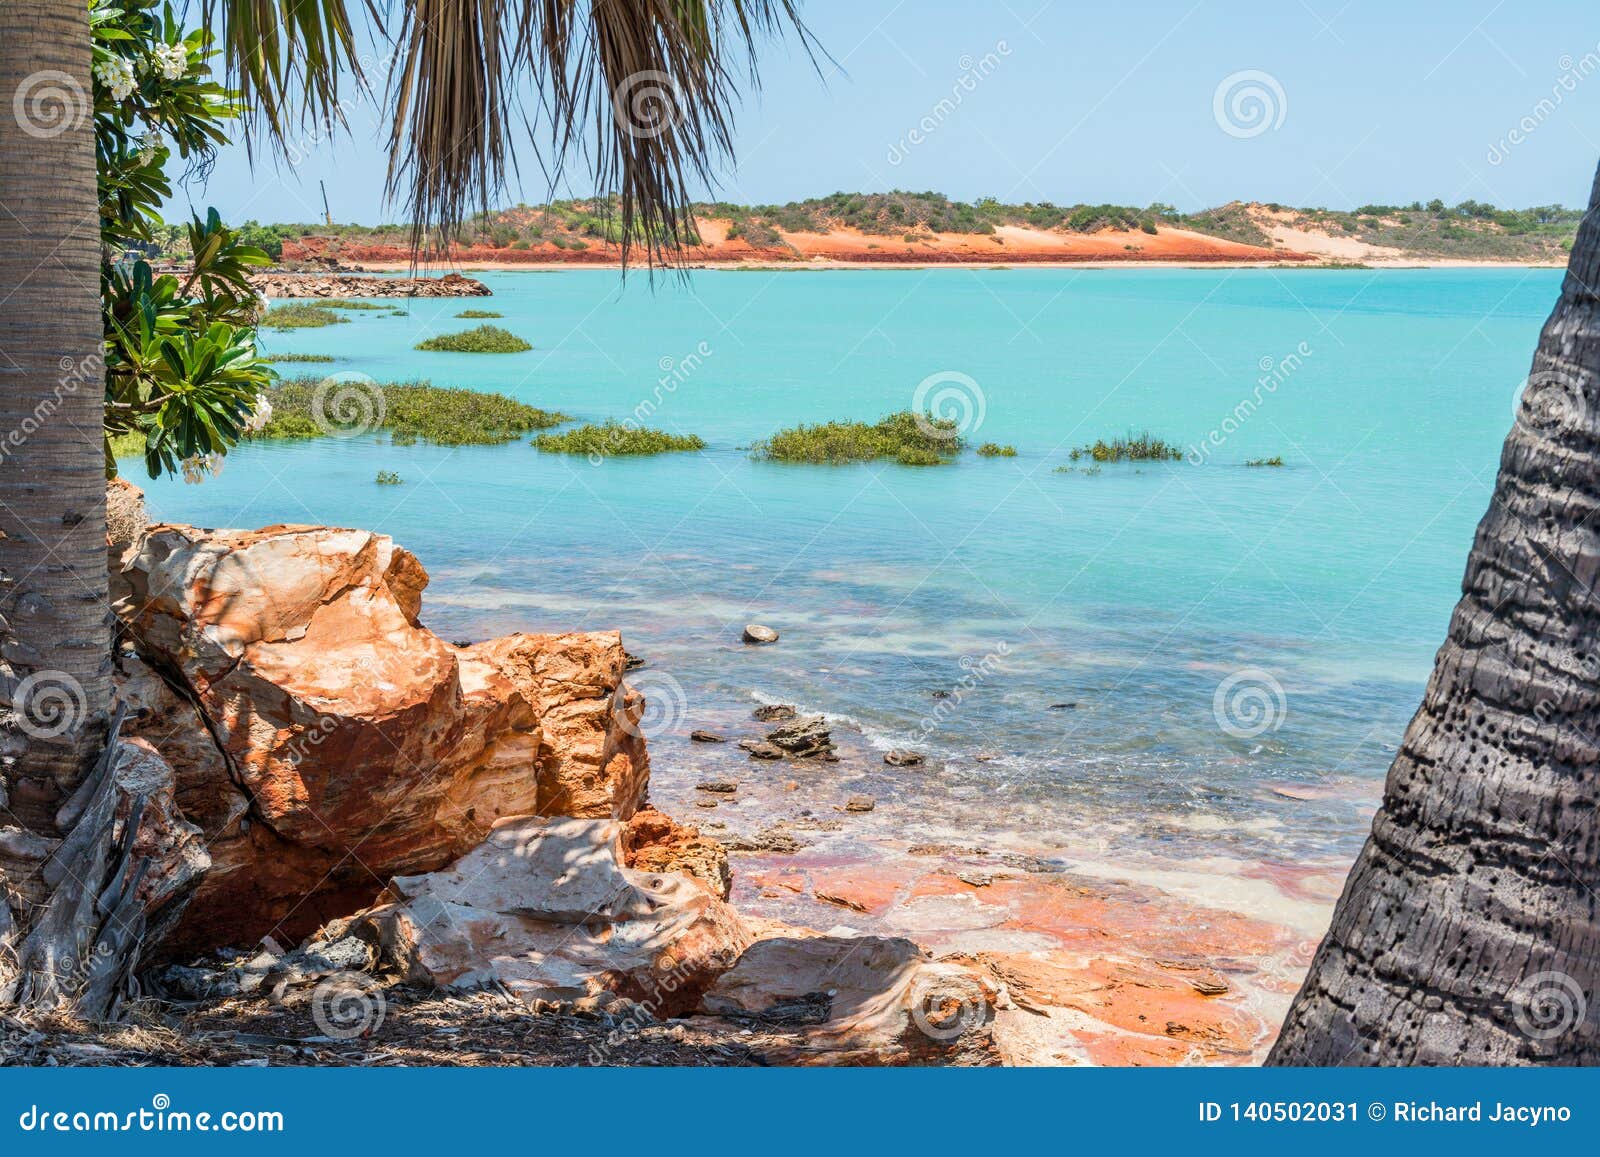 the diverse colours and beauty of broome with red earth, yellow sand and turquoise waters